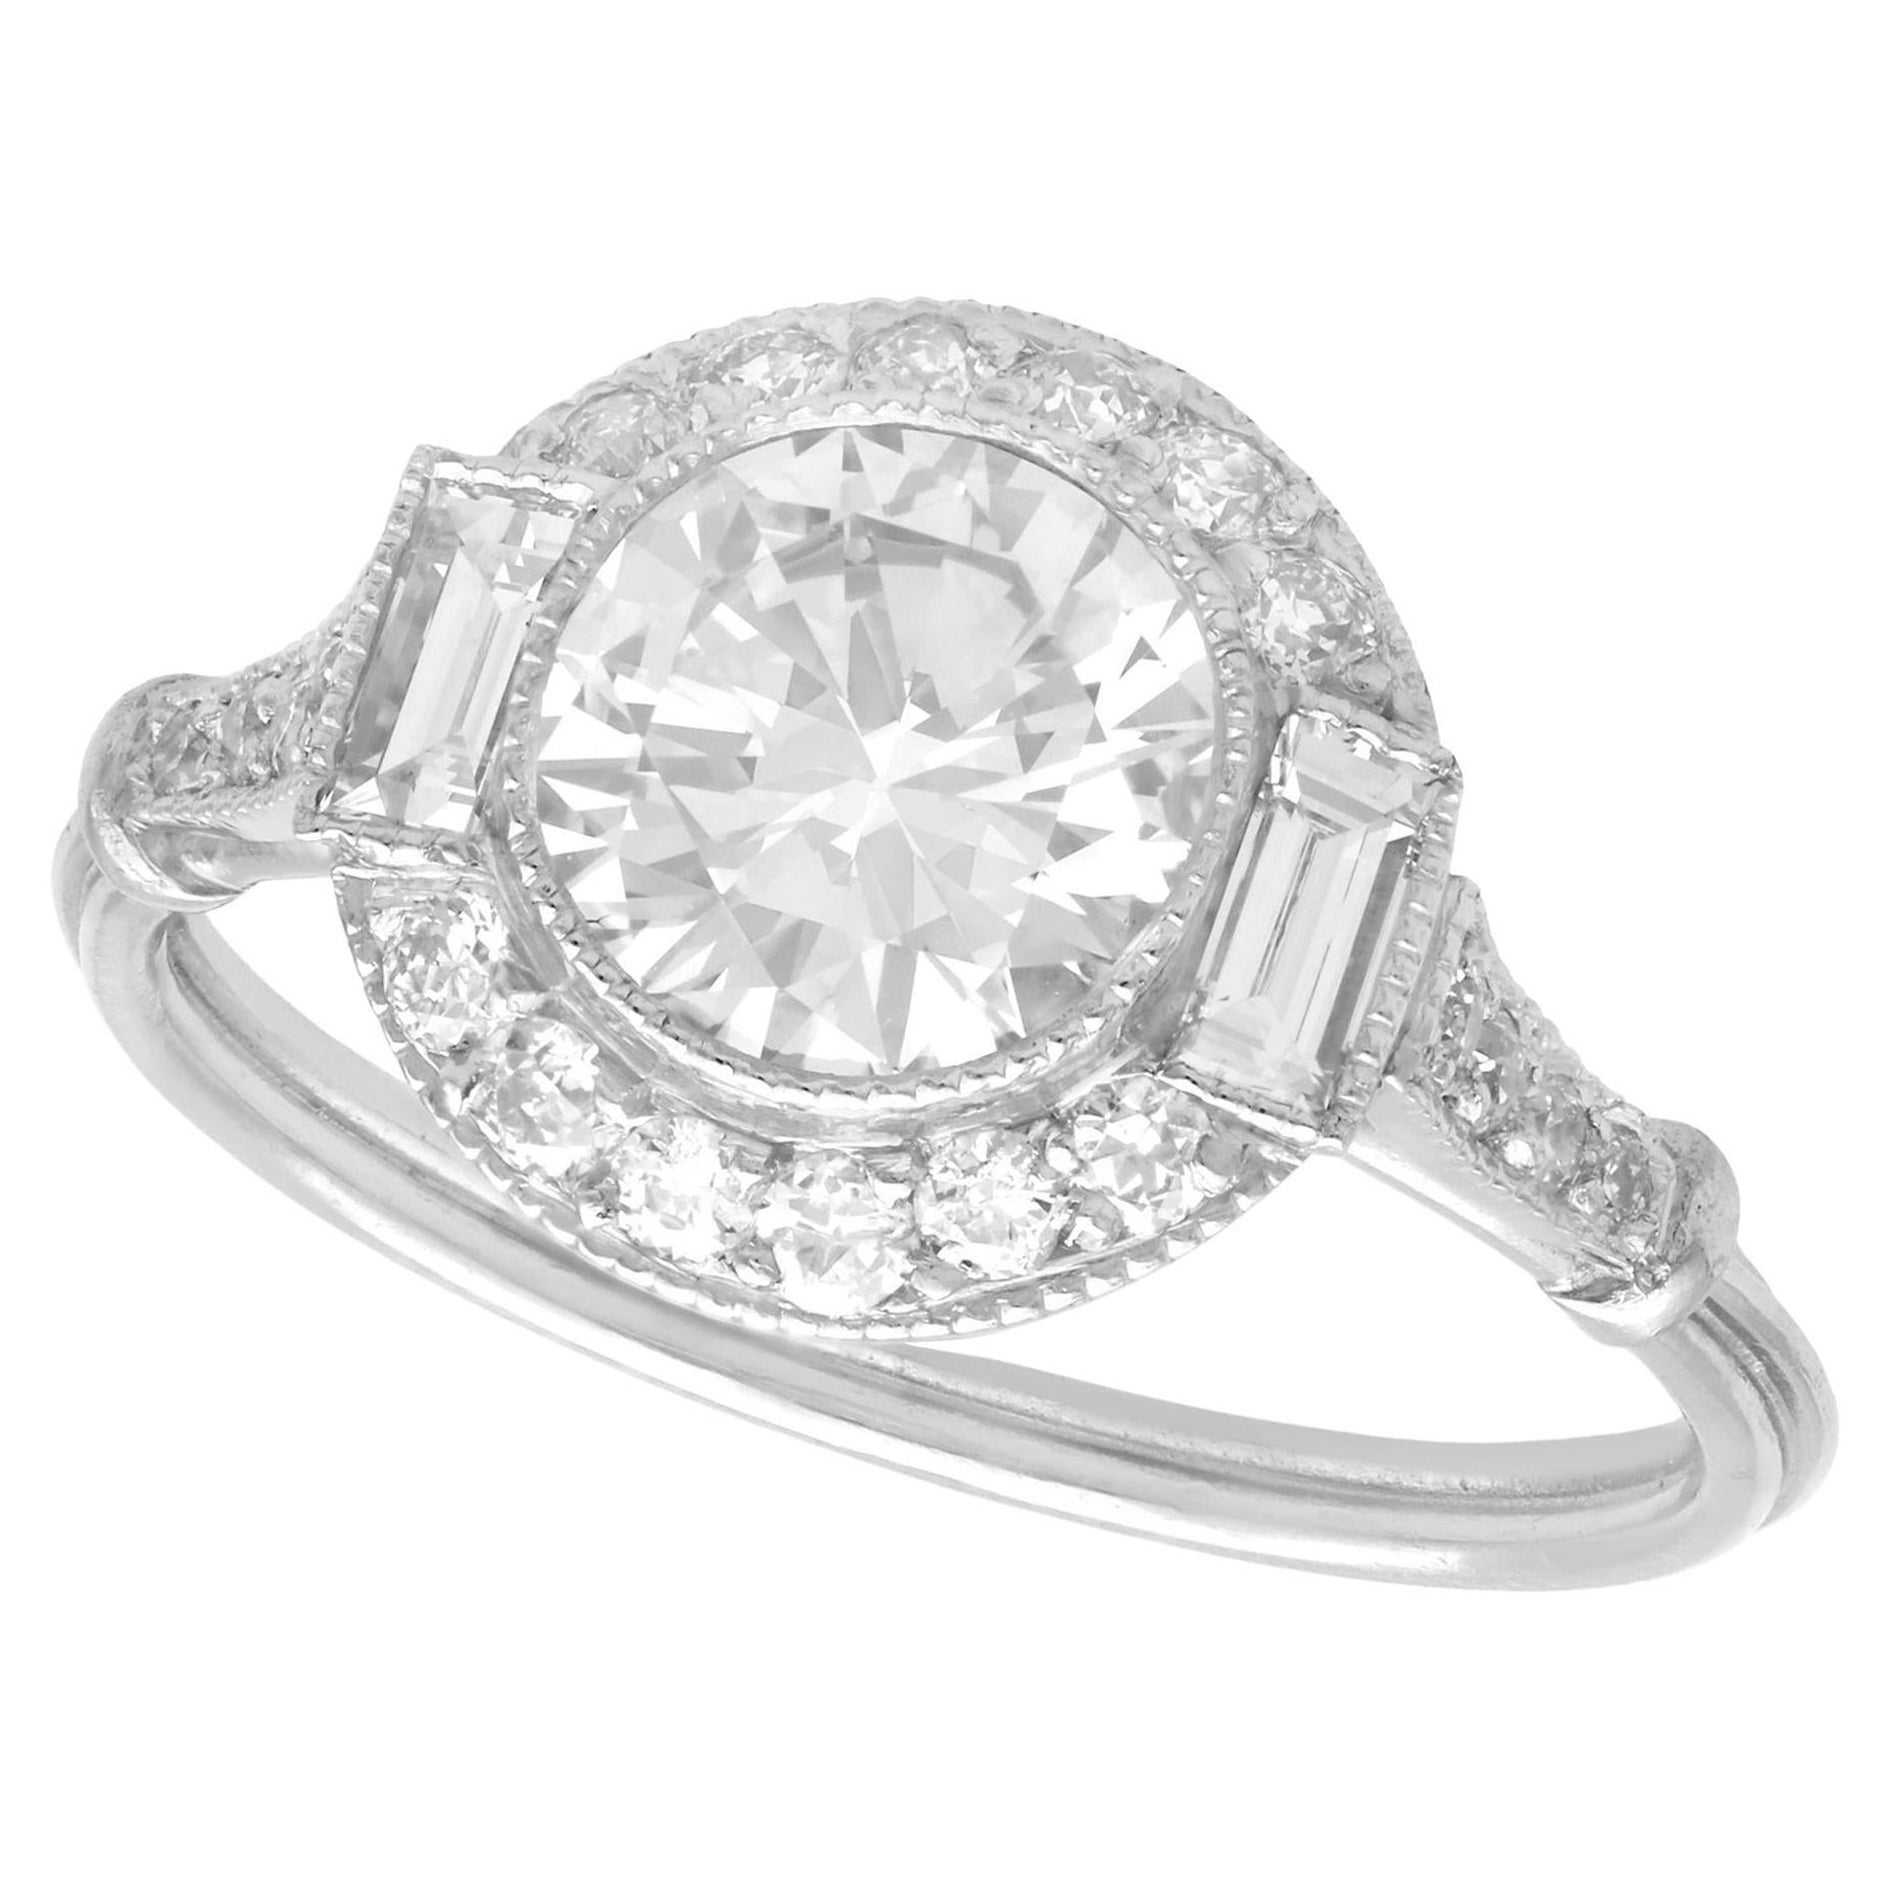 1.82 Carat Diamond and Platinum Halo Engagement Ring For Sale